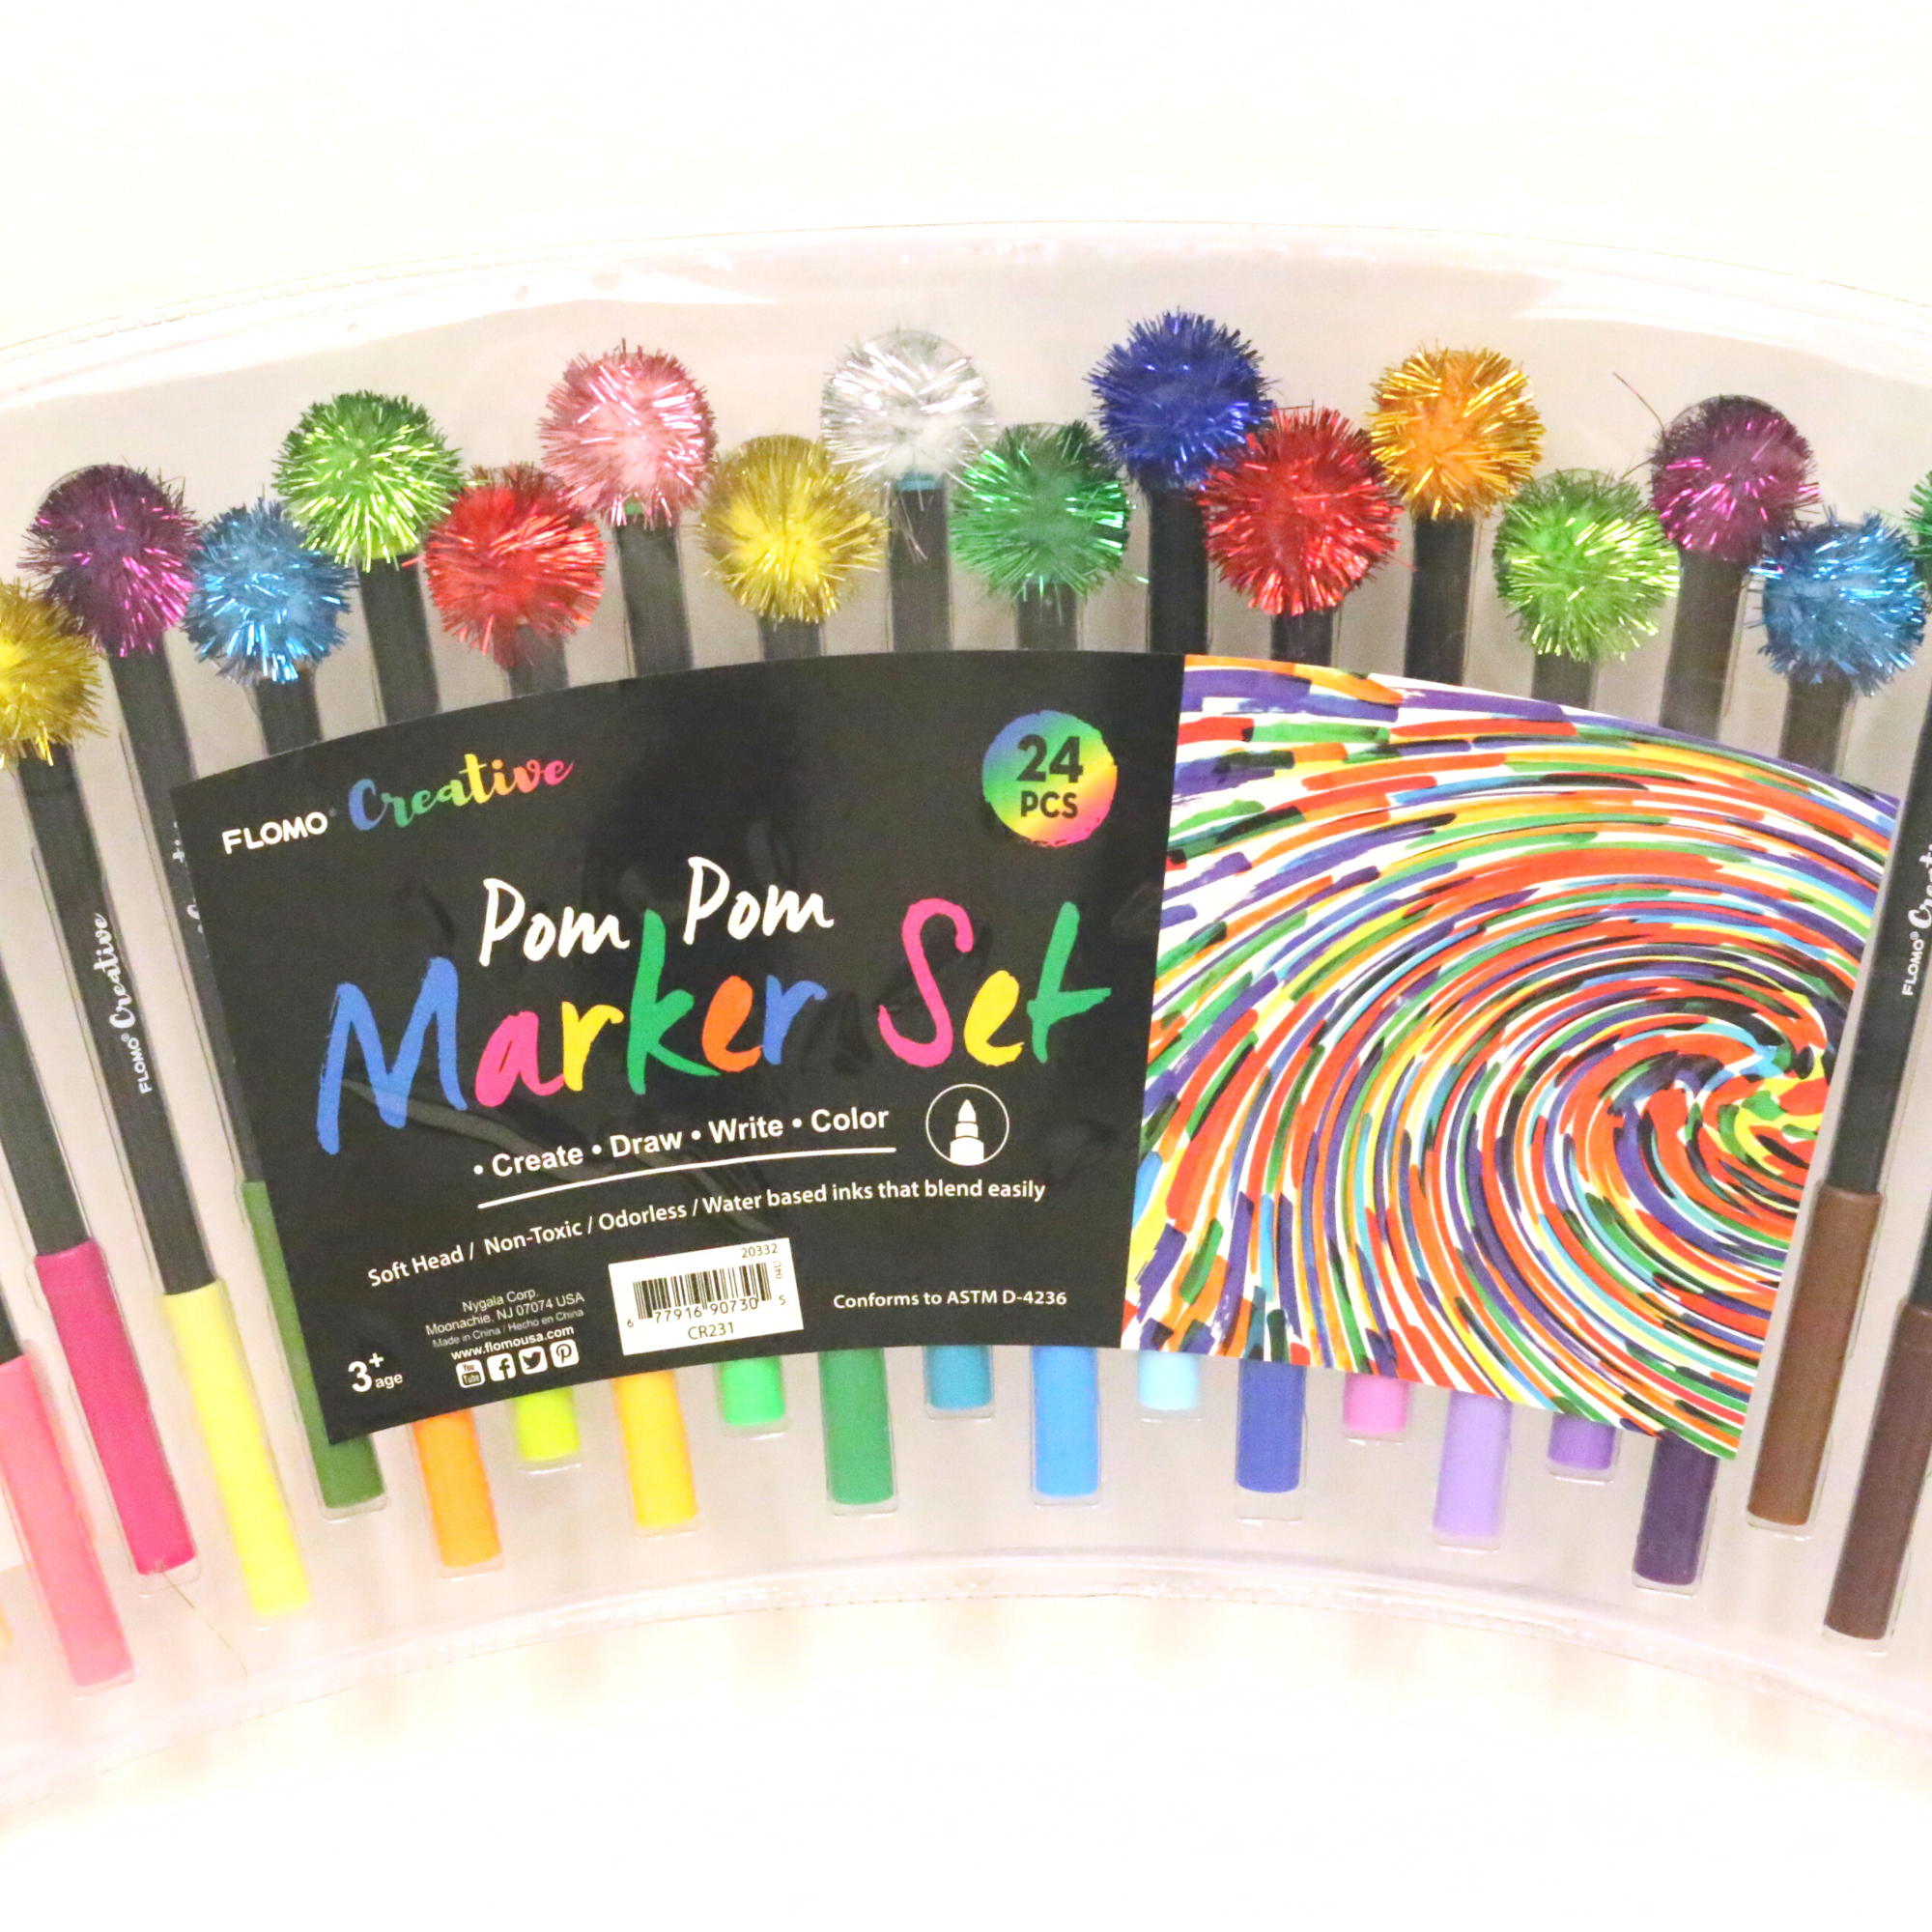 Wholesale 8 Pack Water Based Acrylic Paint Bullet Journal Markers